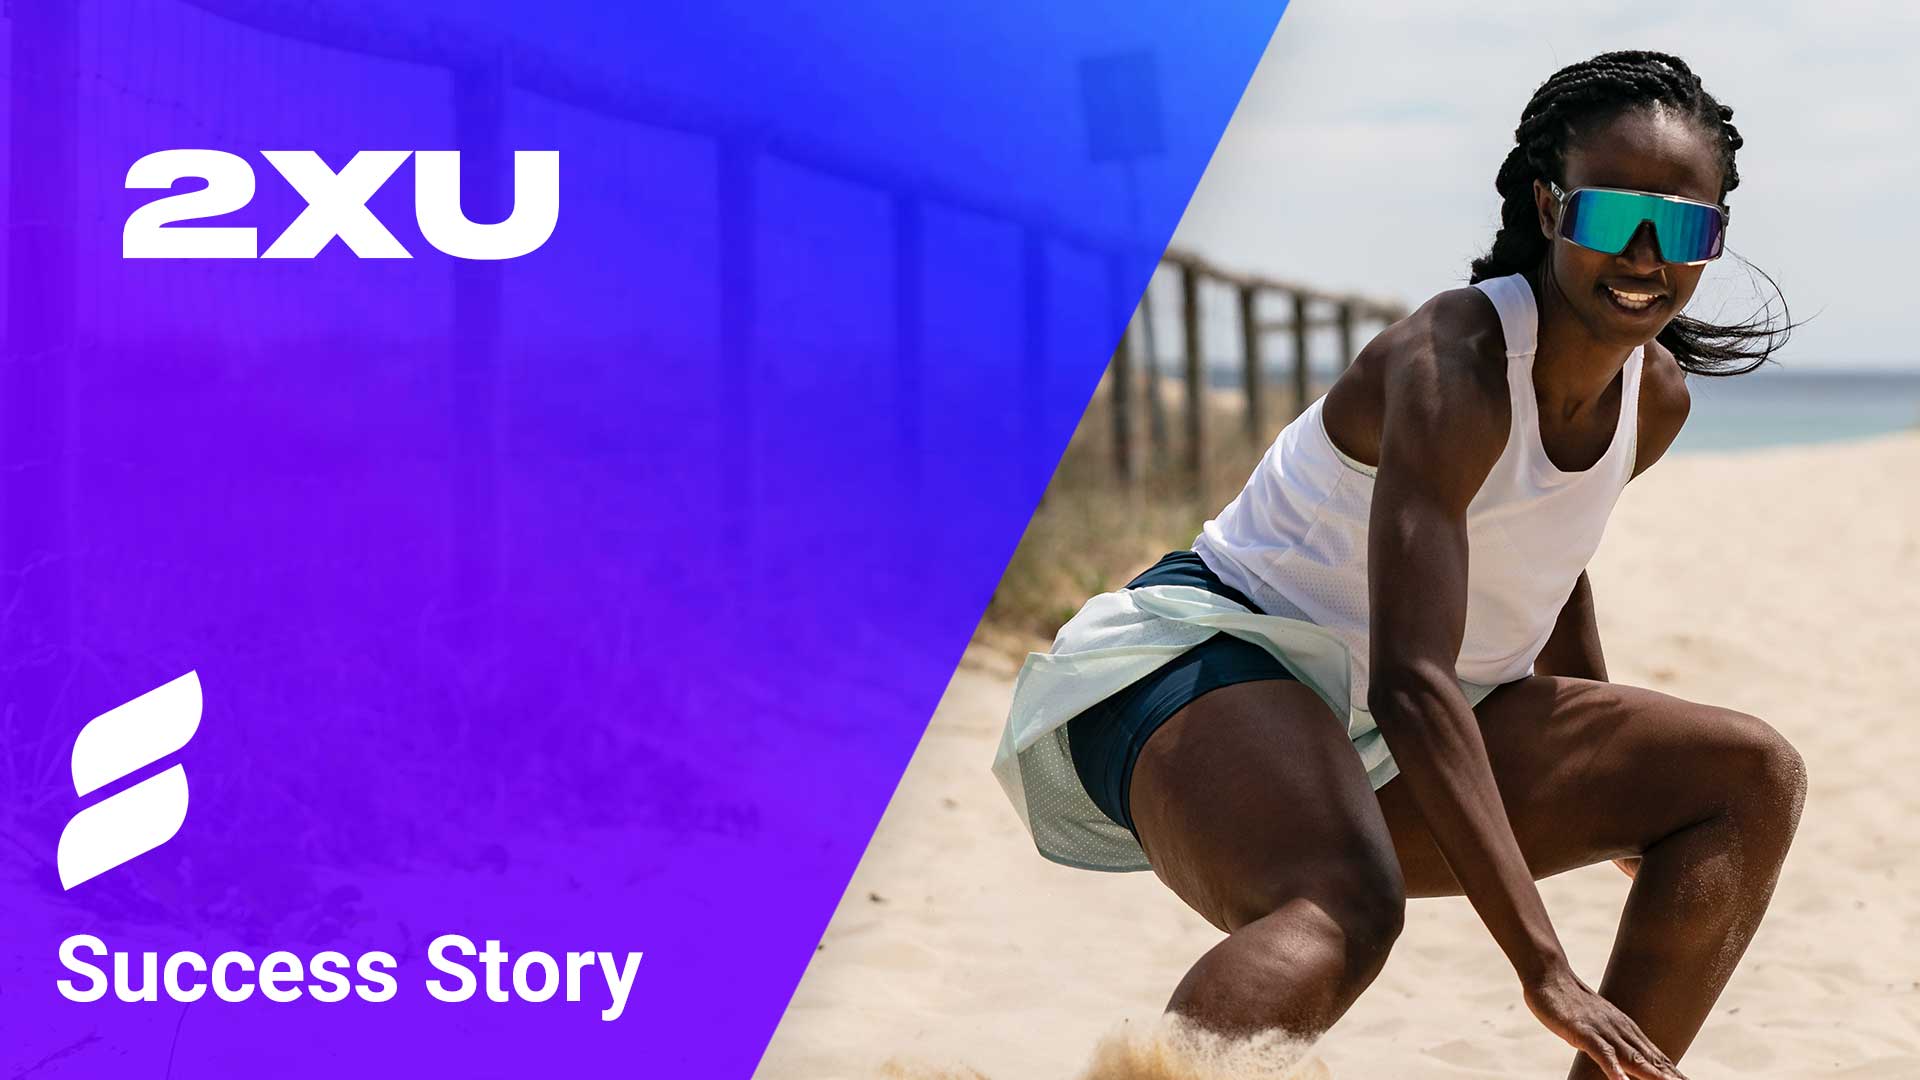 2XU Searchspring Success Story / Case Study Black Woman in sunglasses and athletic wear - grey spandex shorts and white tank - on a beach